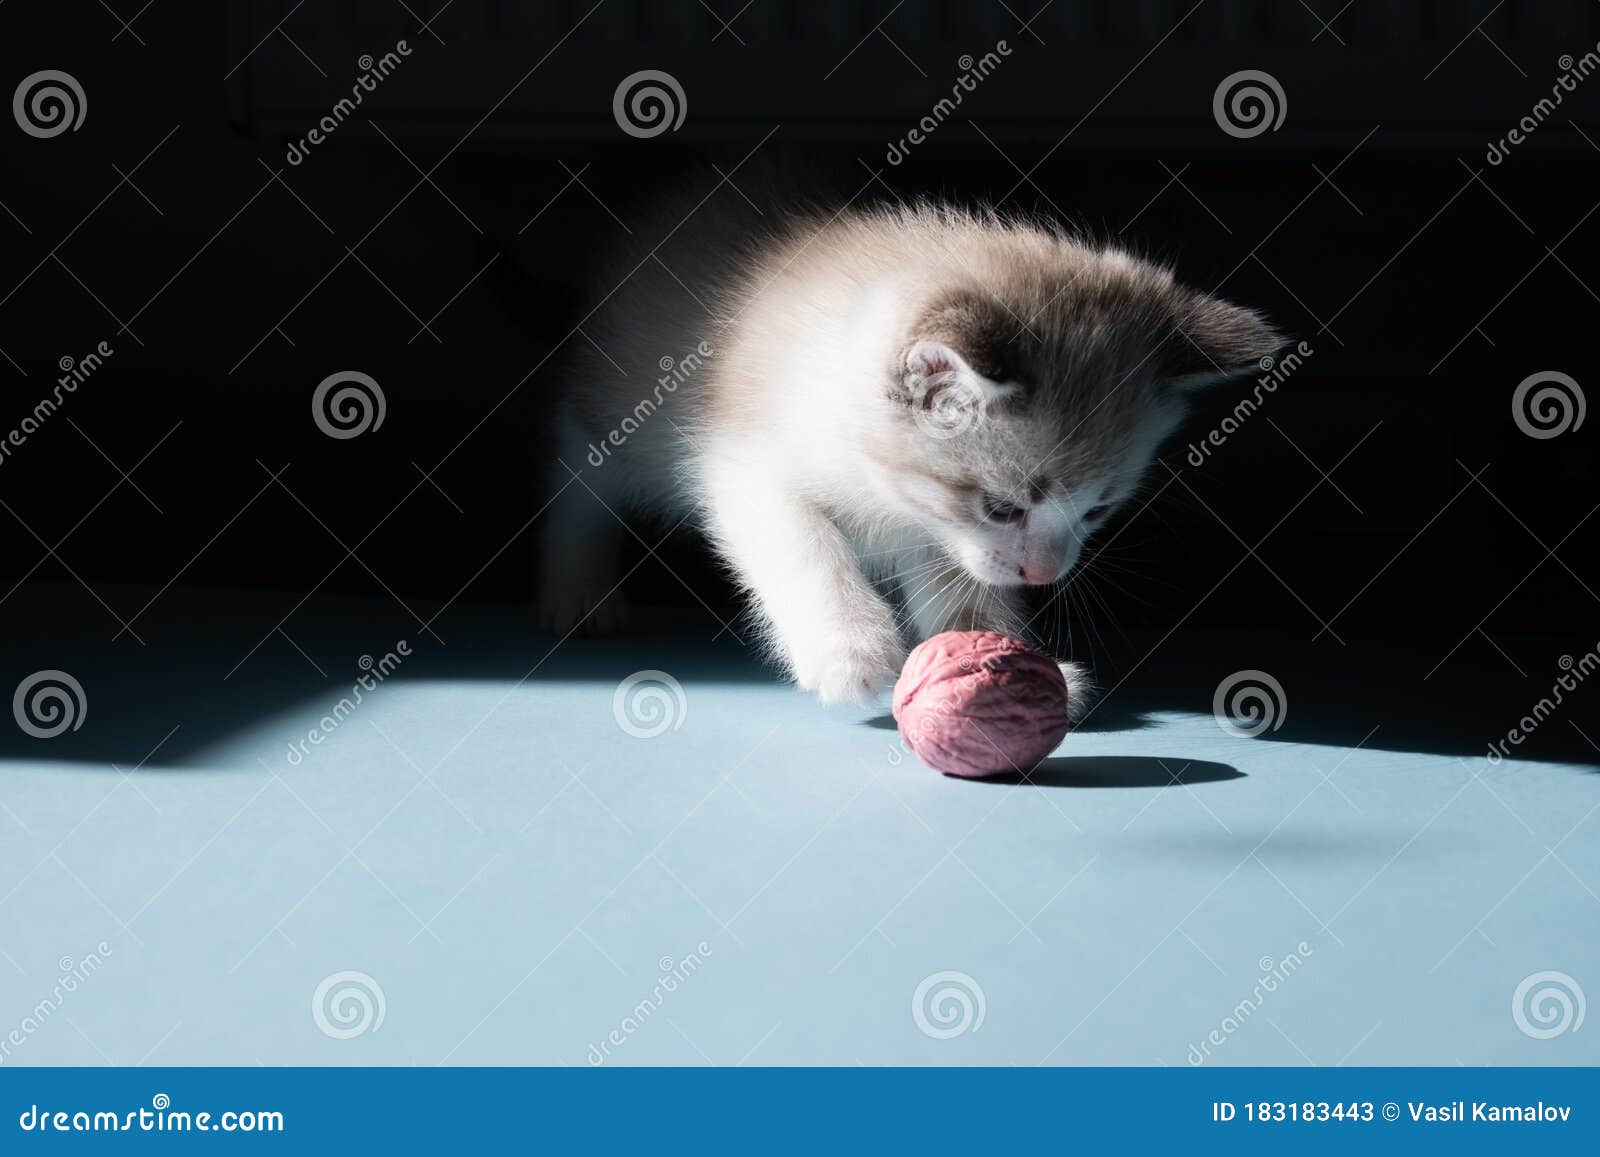 white little luminous kitten sadly looks longingly at a toy